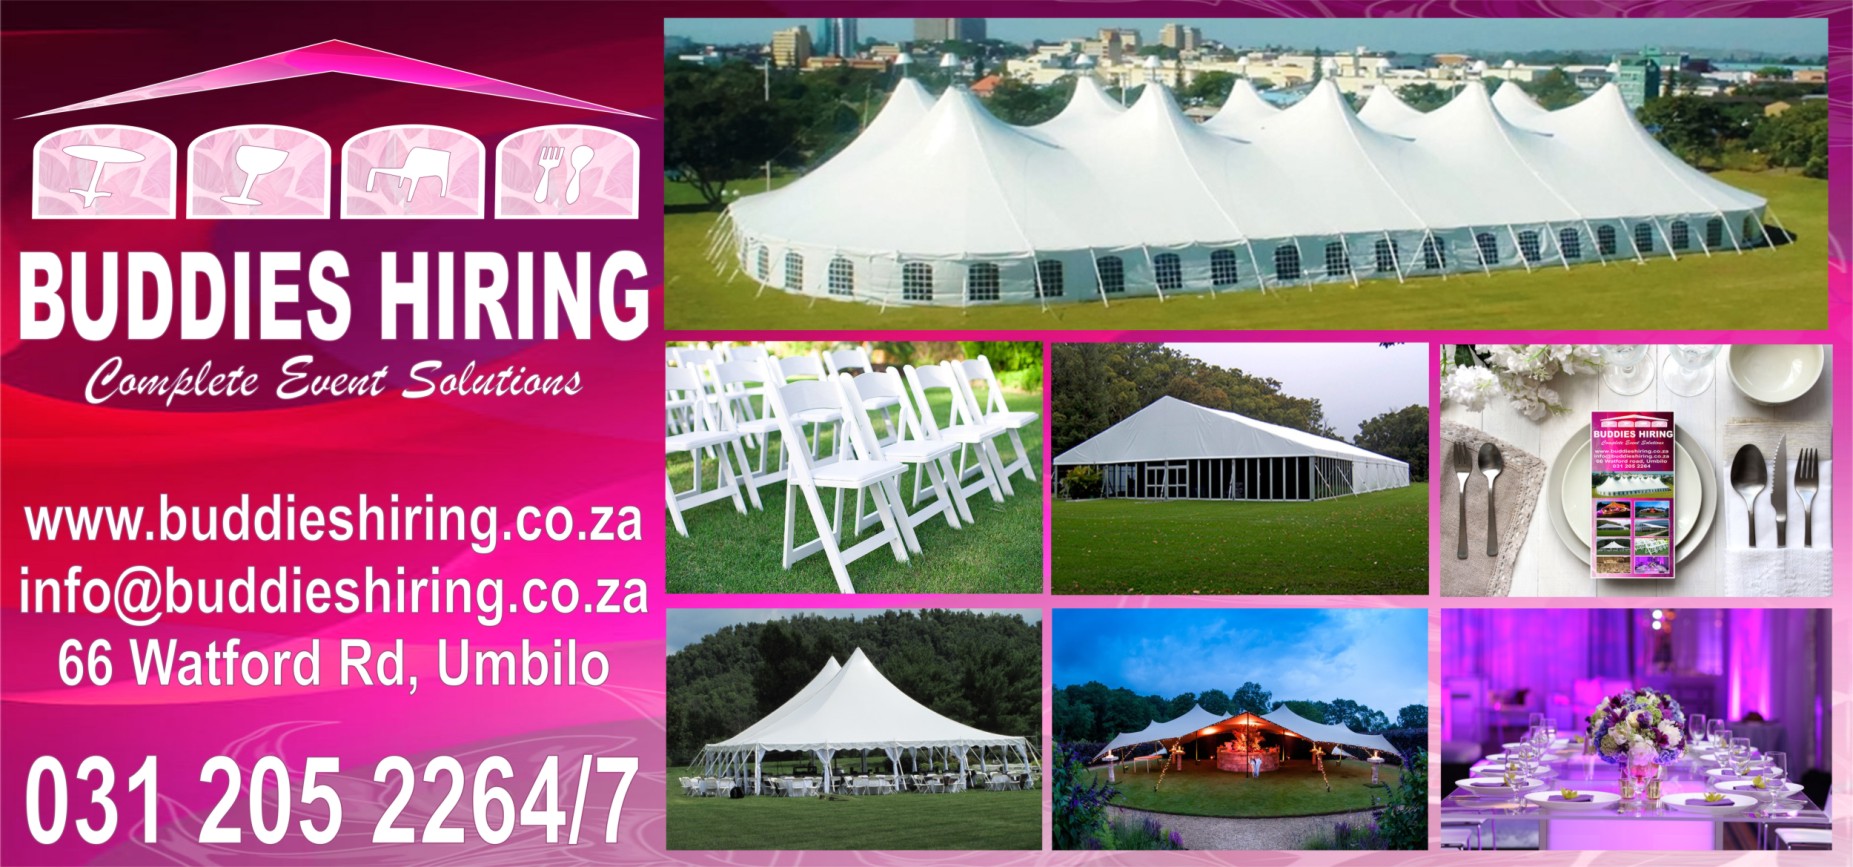 Complete Event Solutions